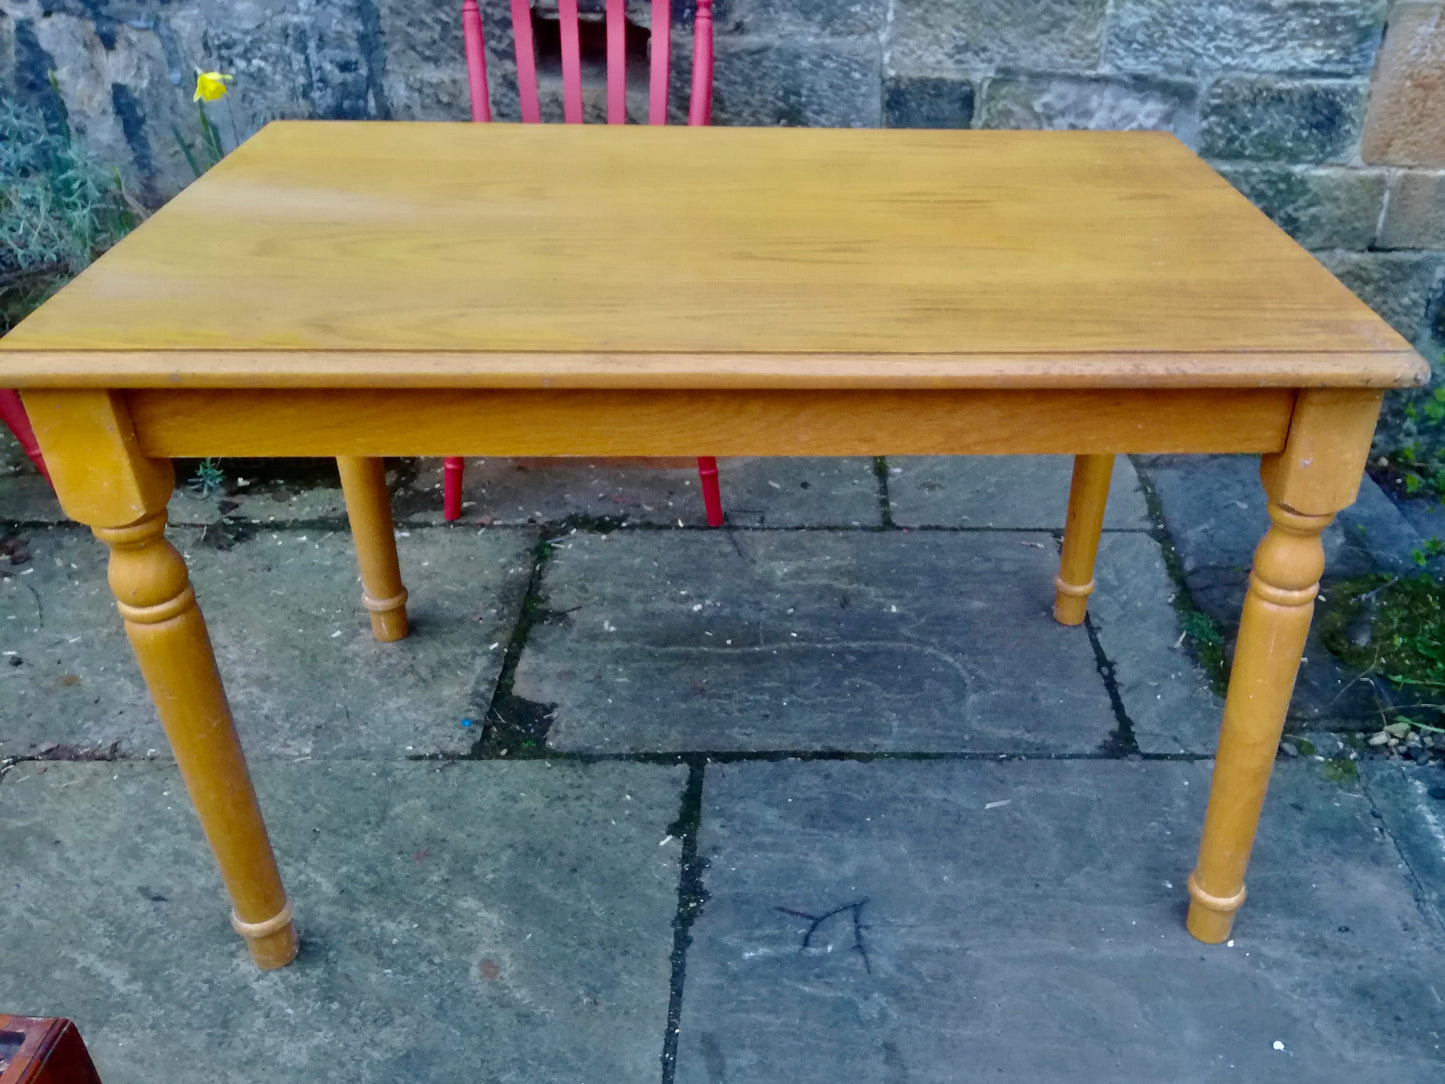 Vintage beech wood dining table  - to have it painted please contact me to discuss what you would like.